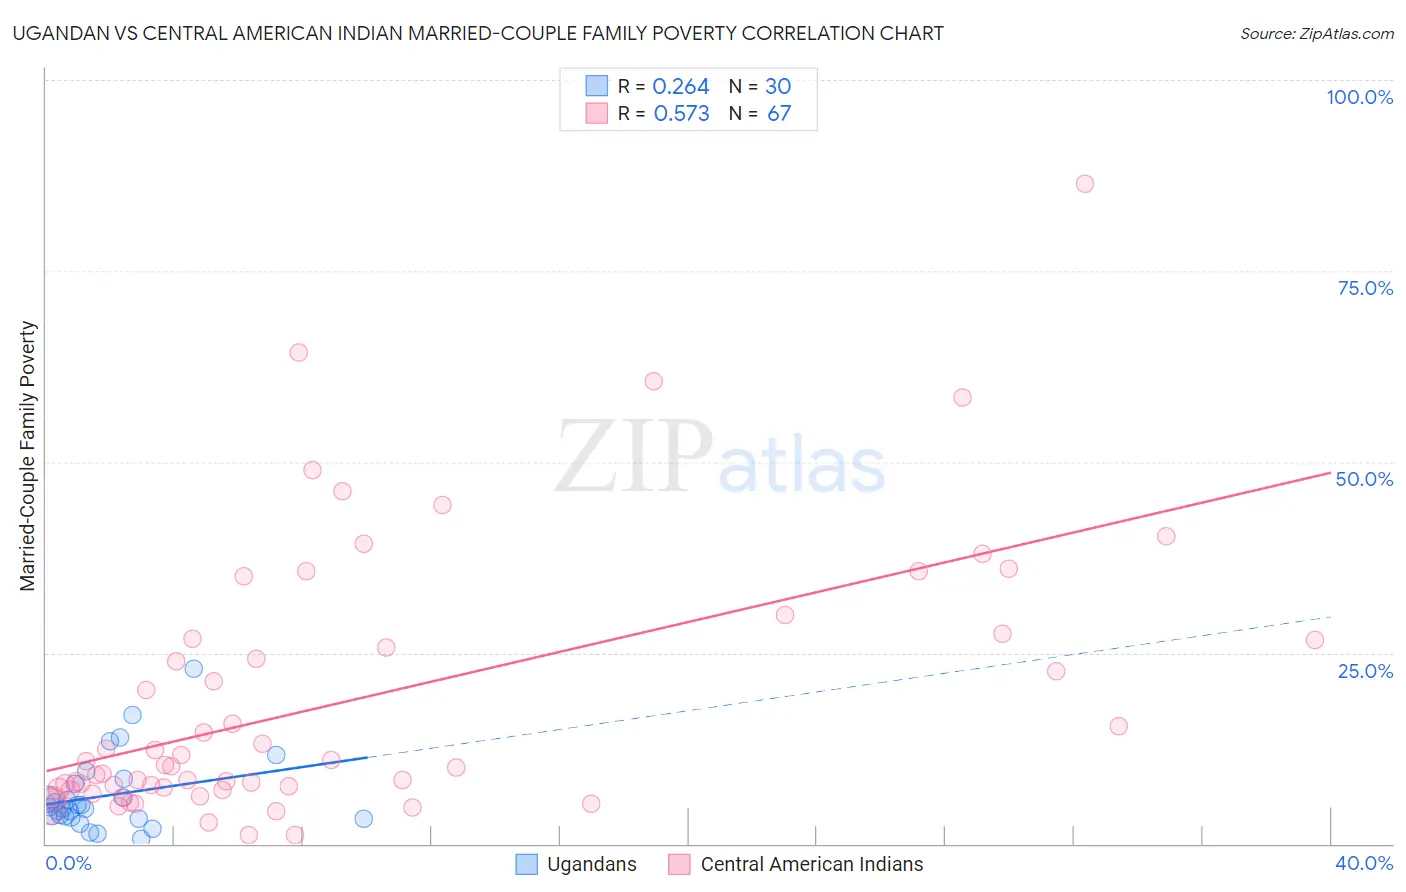 Ugandan vs Central American Indian Married-Couple Family Poverty